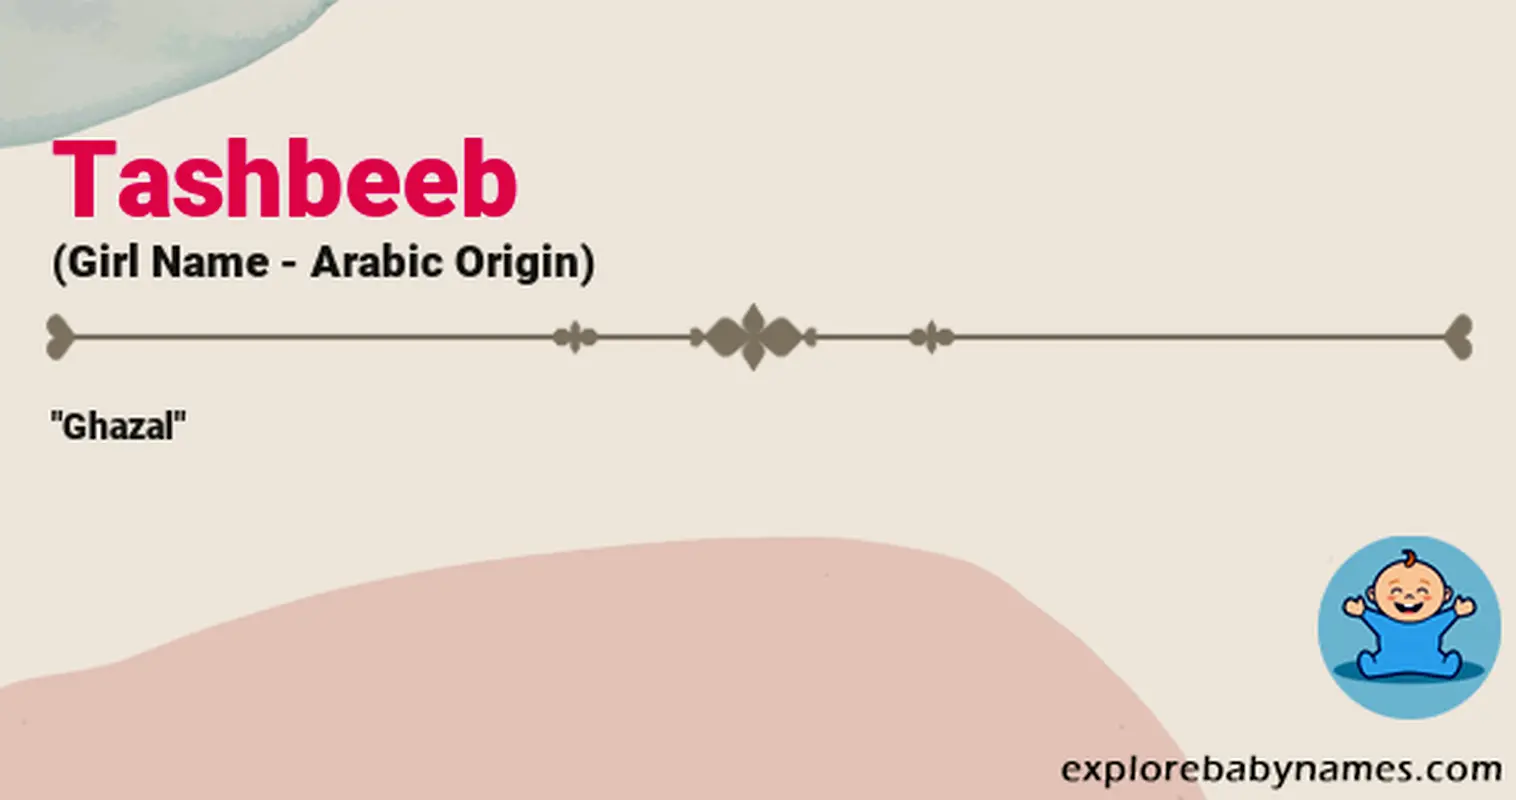 Meaning of Tashbeeb